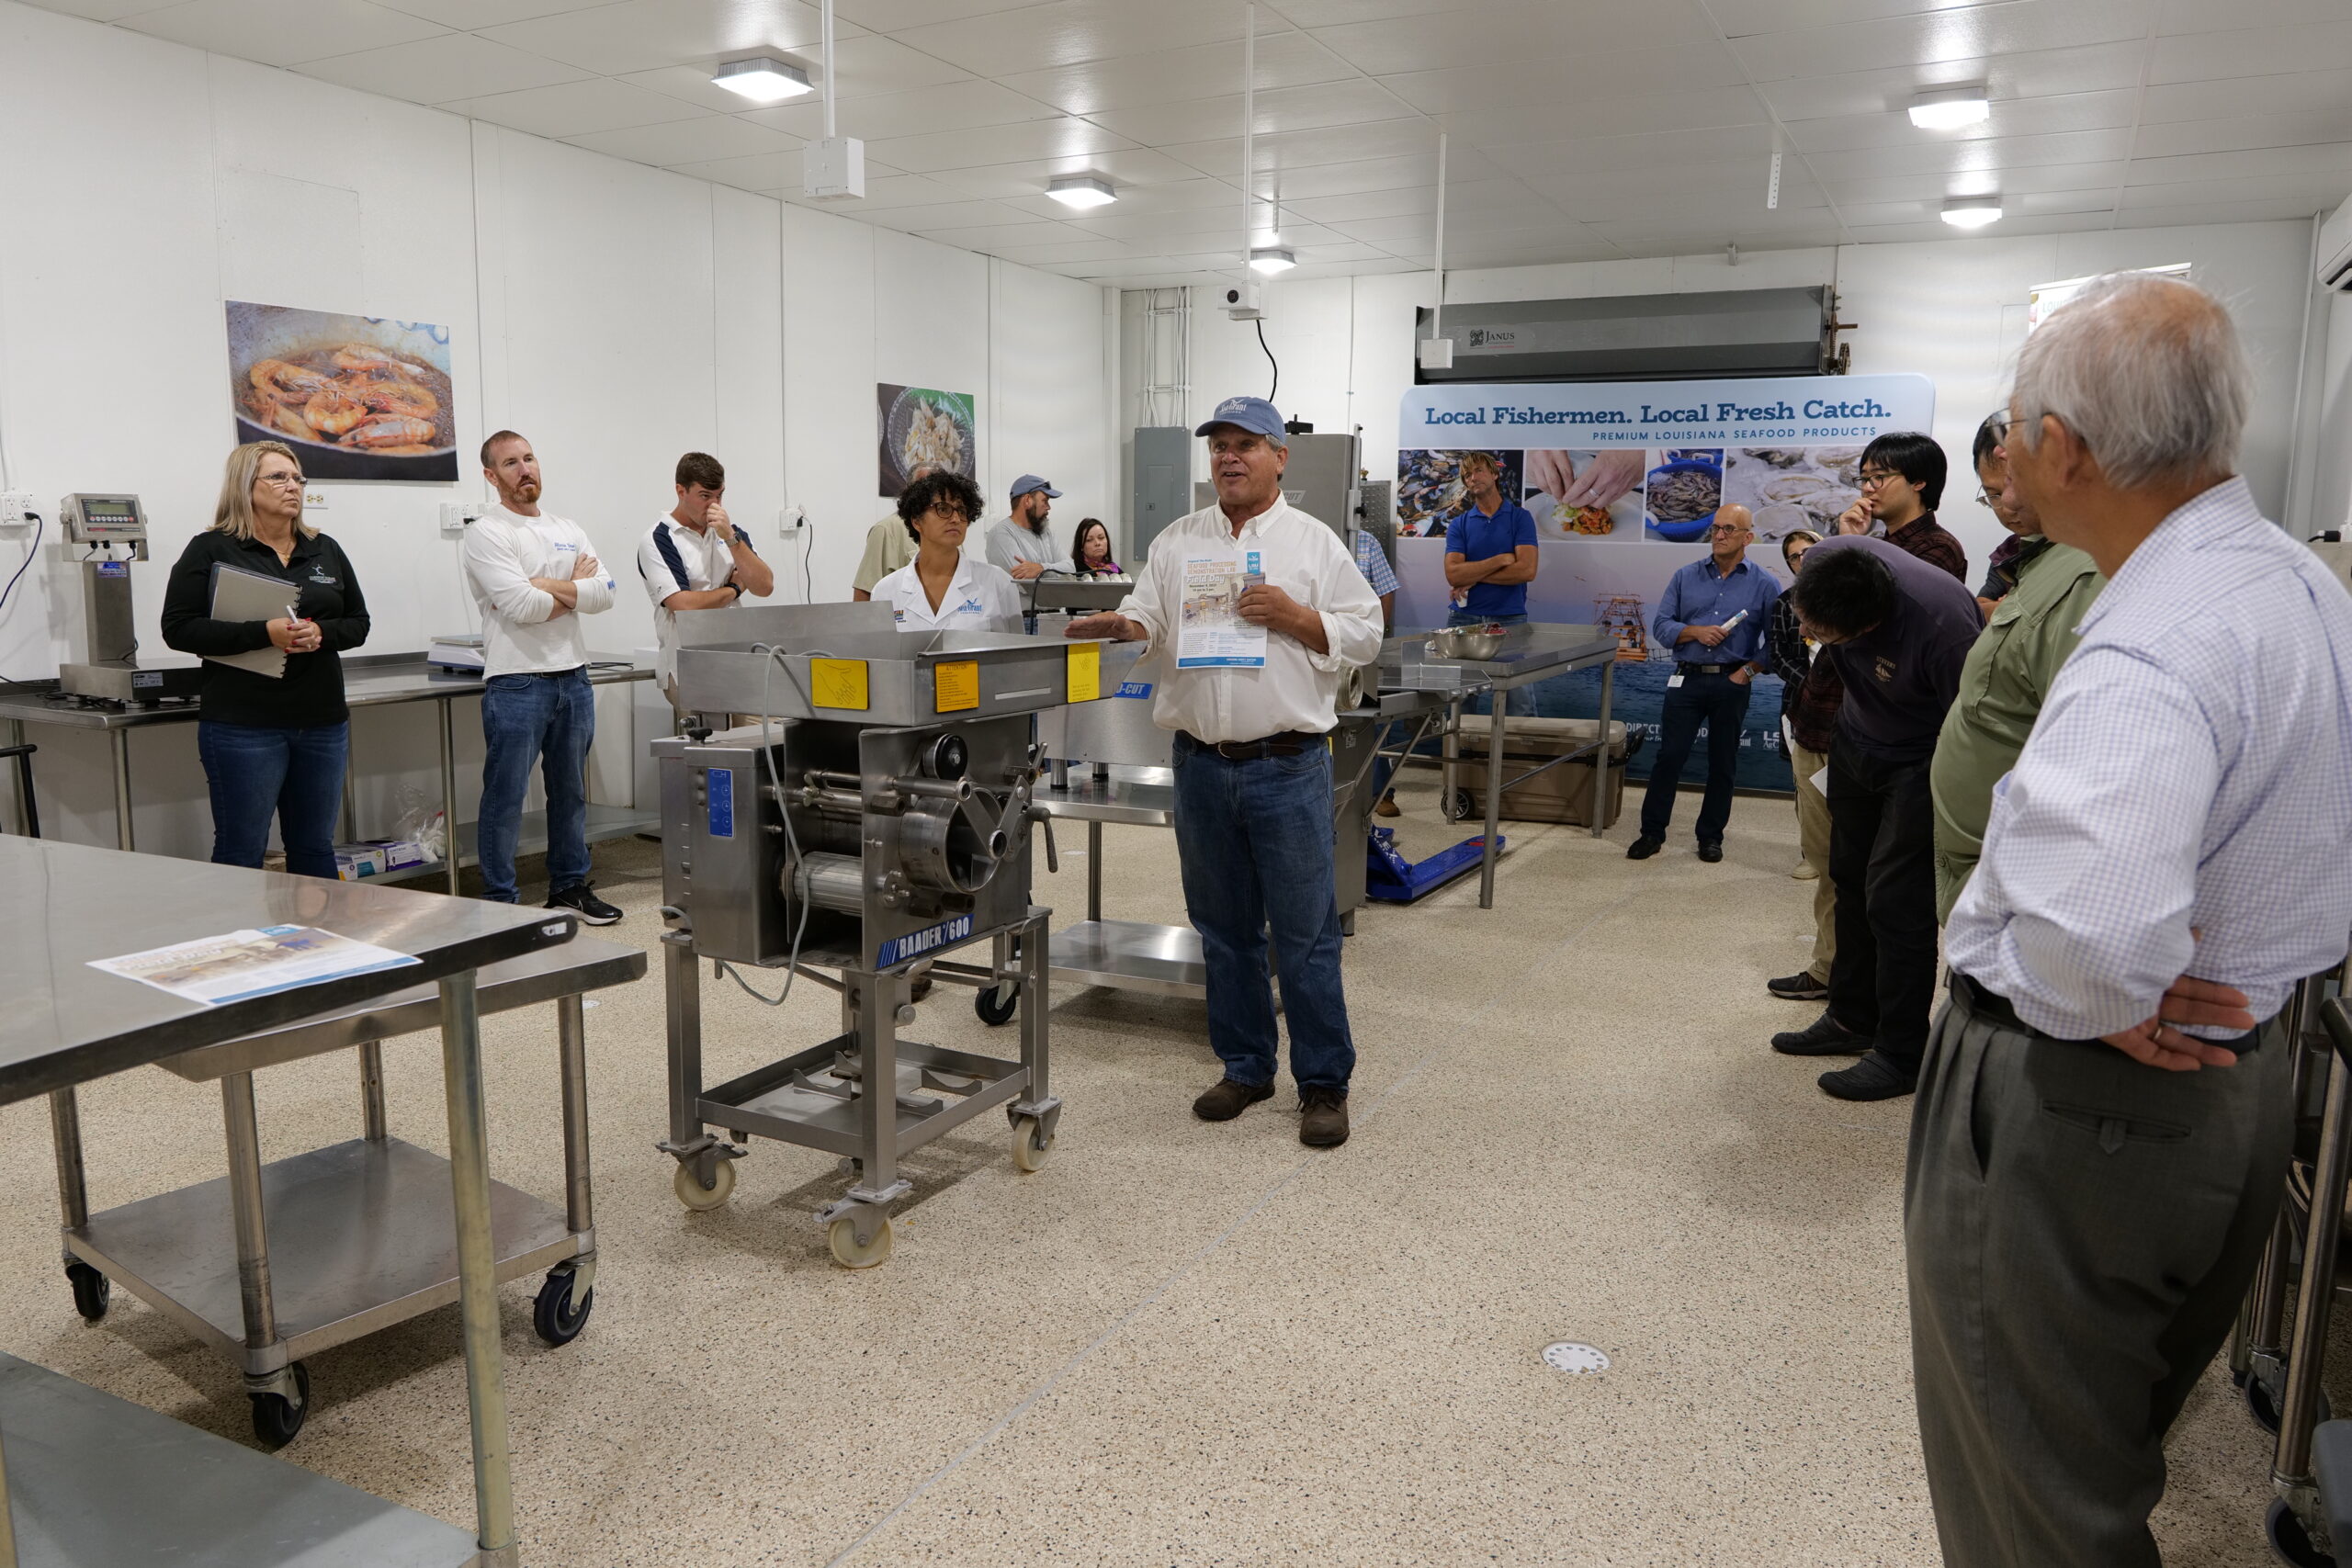 Man talking to a group of people in a food processing room.